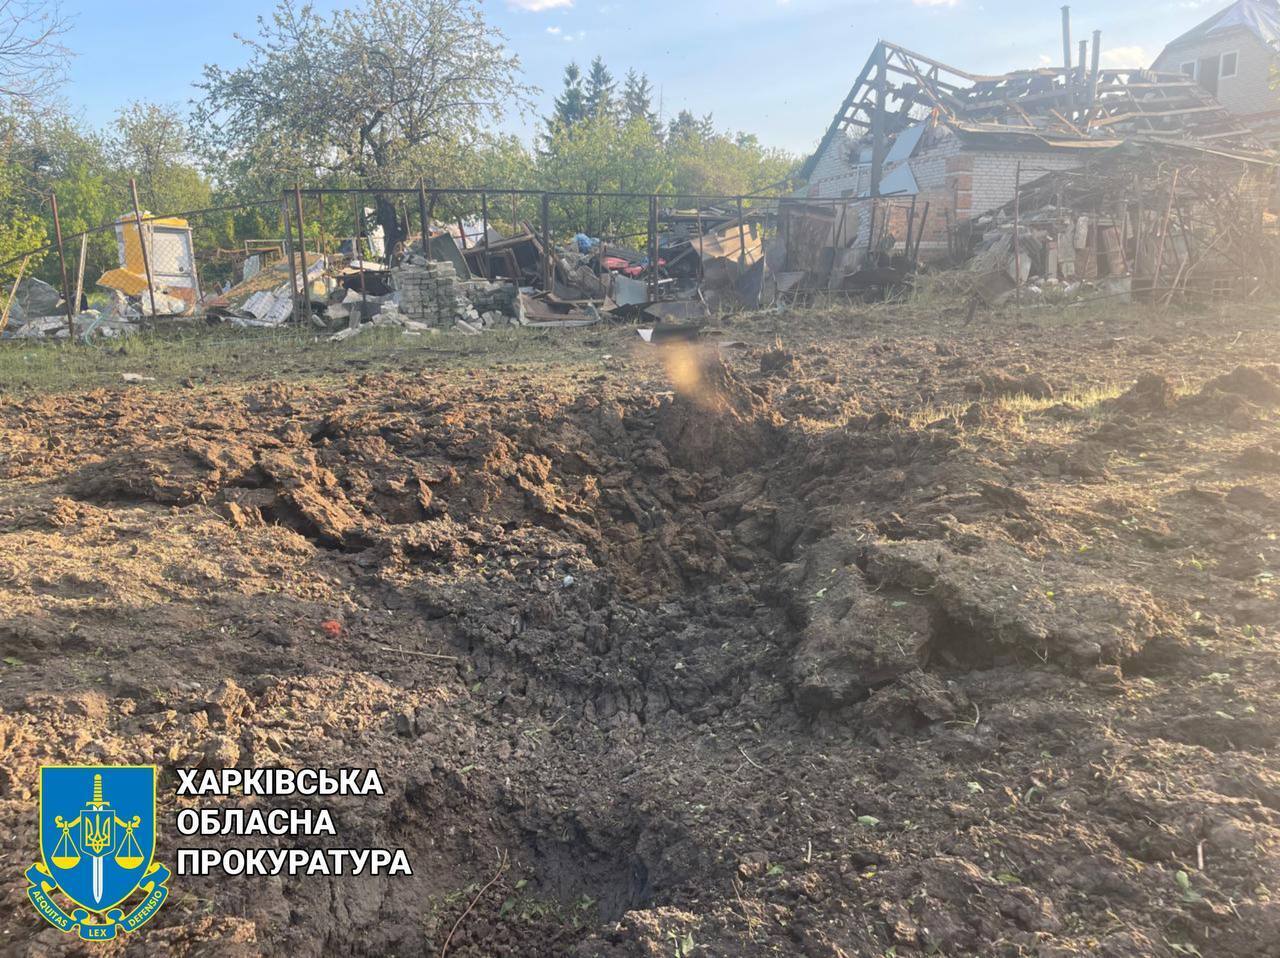 Russians hit civilian infrastructure in Dergachi, Kharkiv region: children are among the victims. Photos and videos